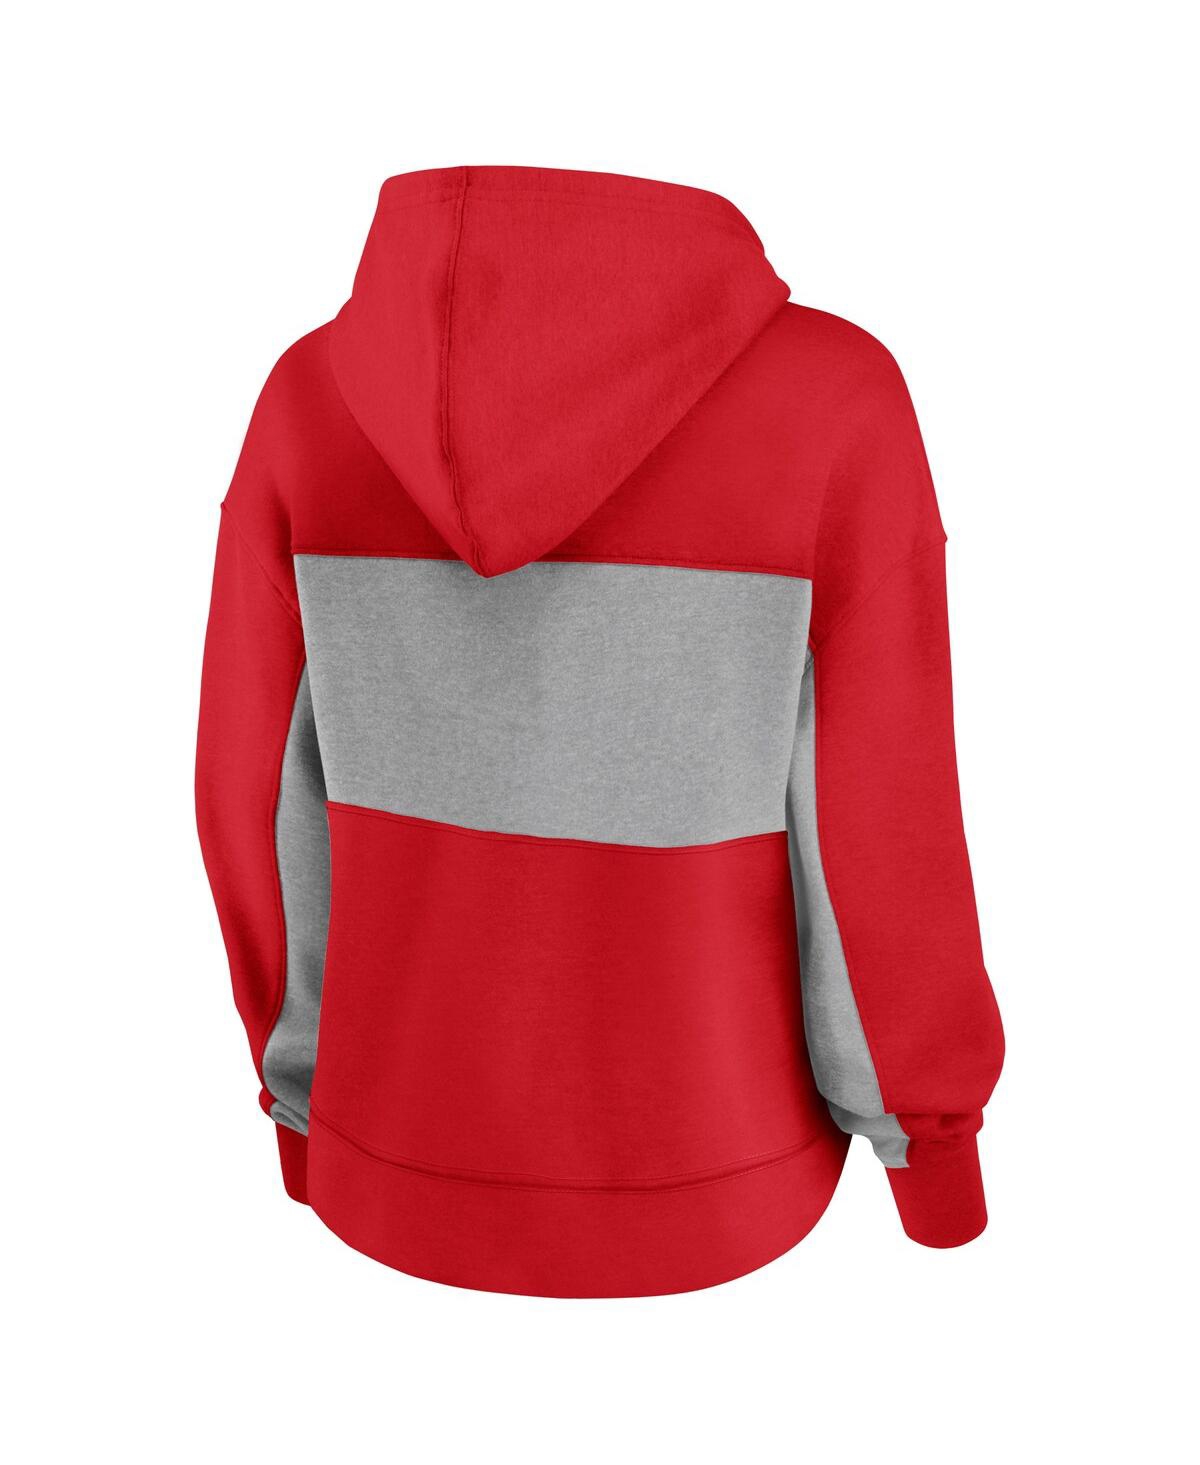 Shop Fanatics Women's  Red Los Angeles Angels Filled Stat Sheet Pullover Hoodie